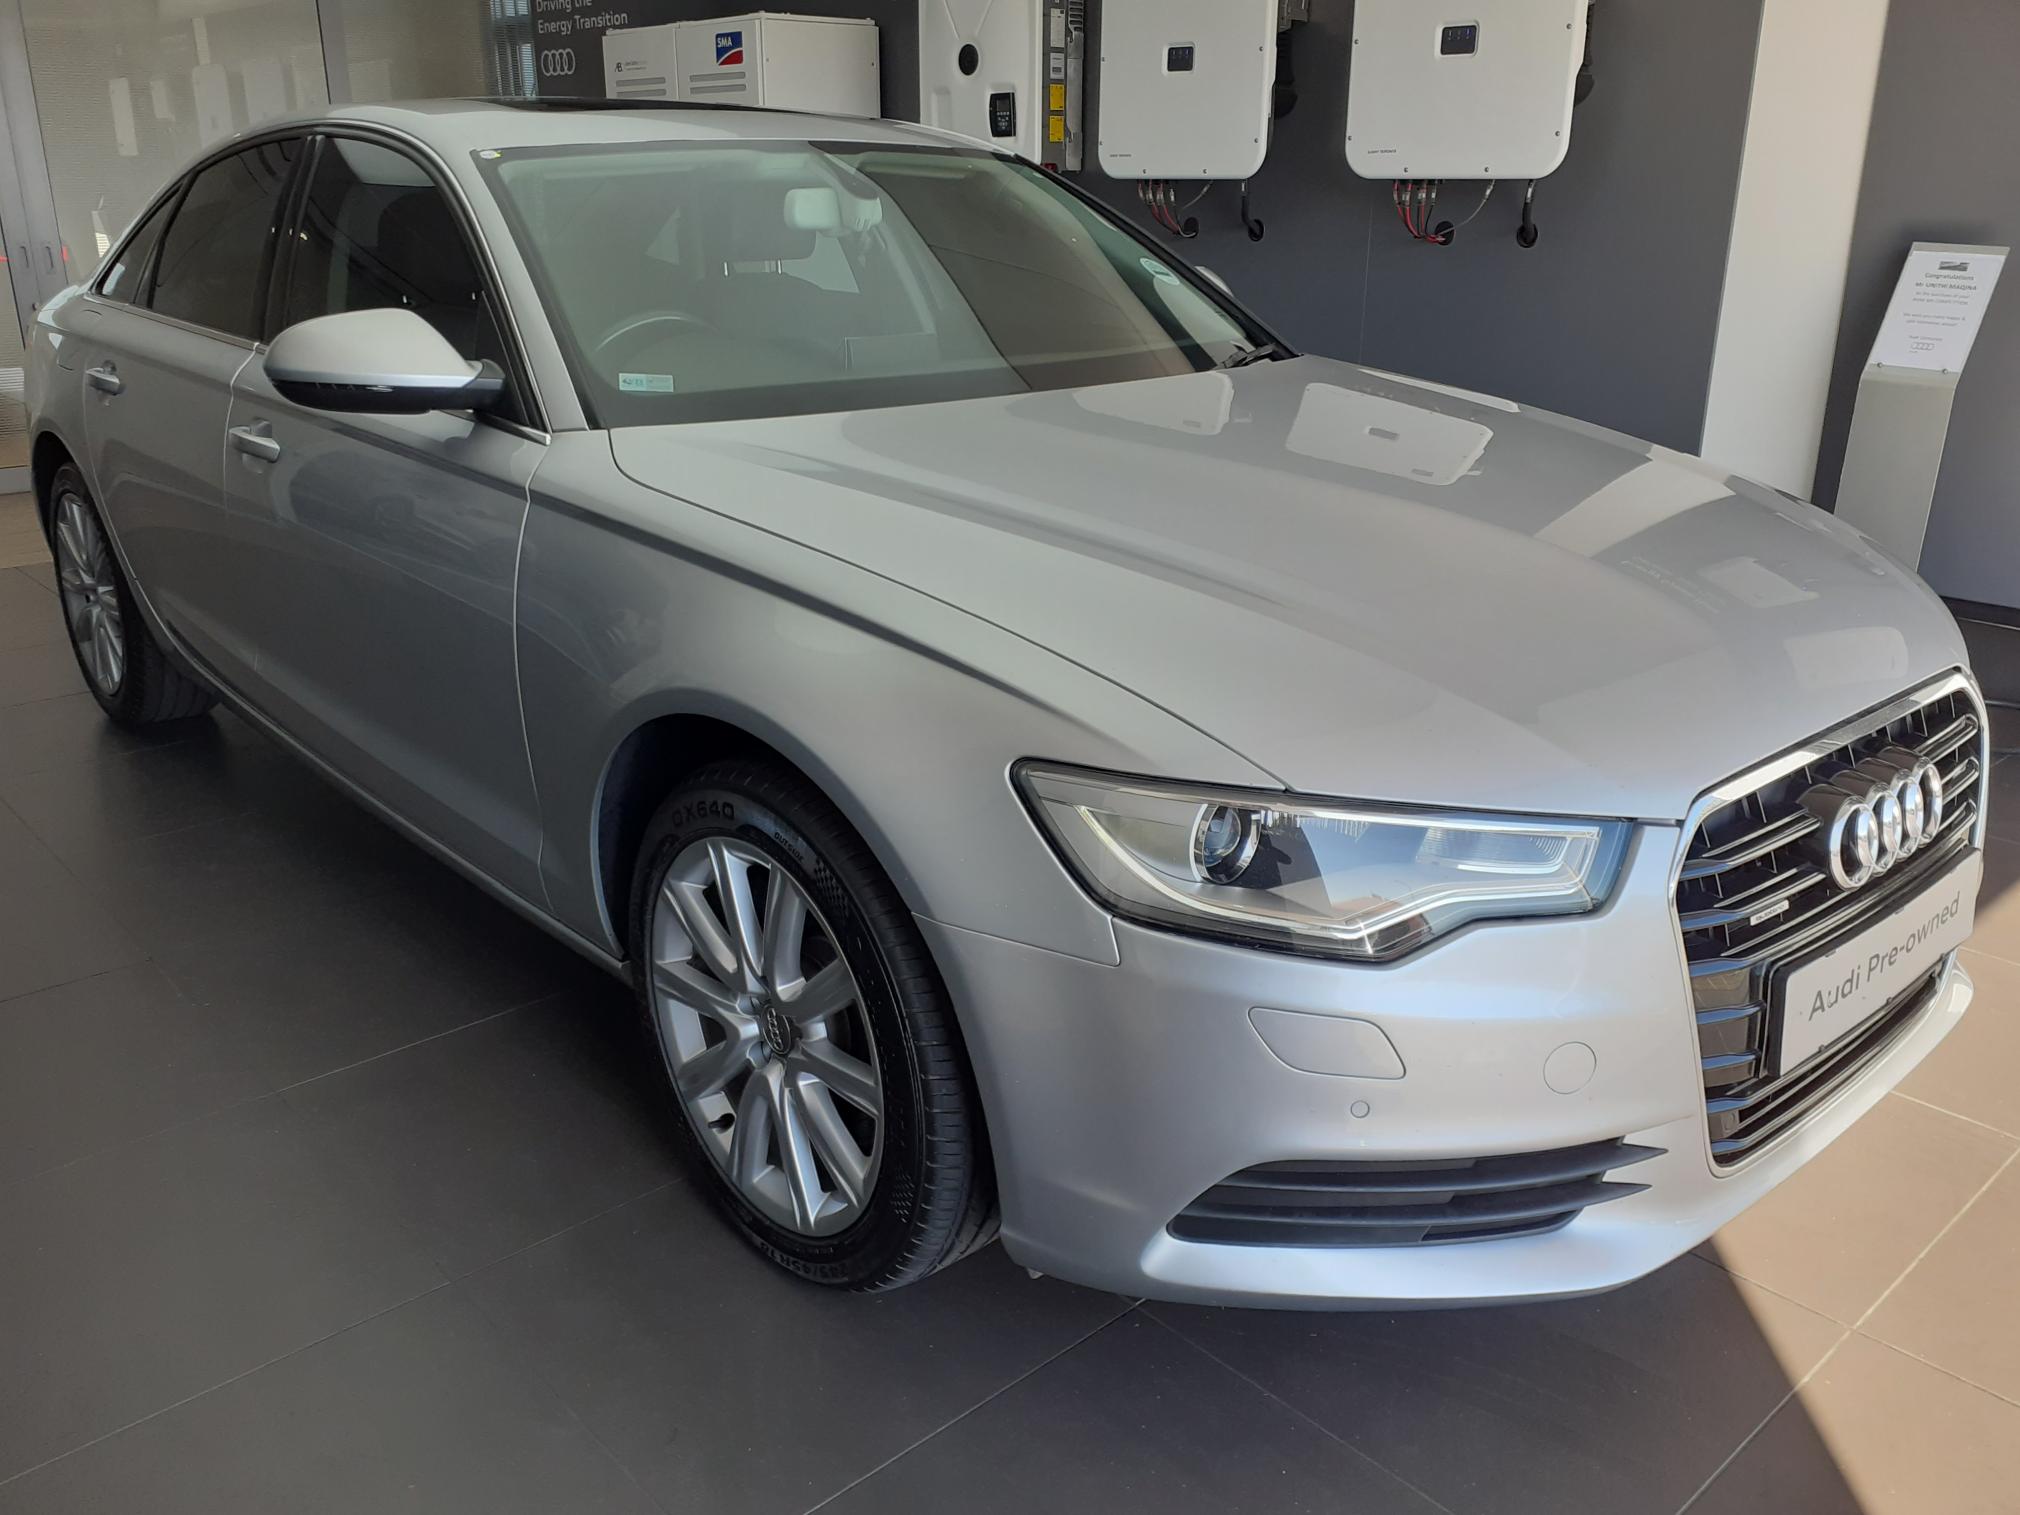 2012 Audi A6  for sale - 0489UNF073133